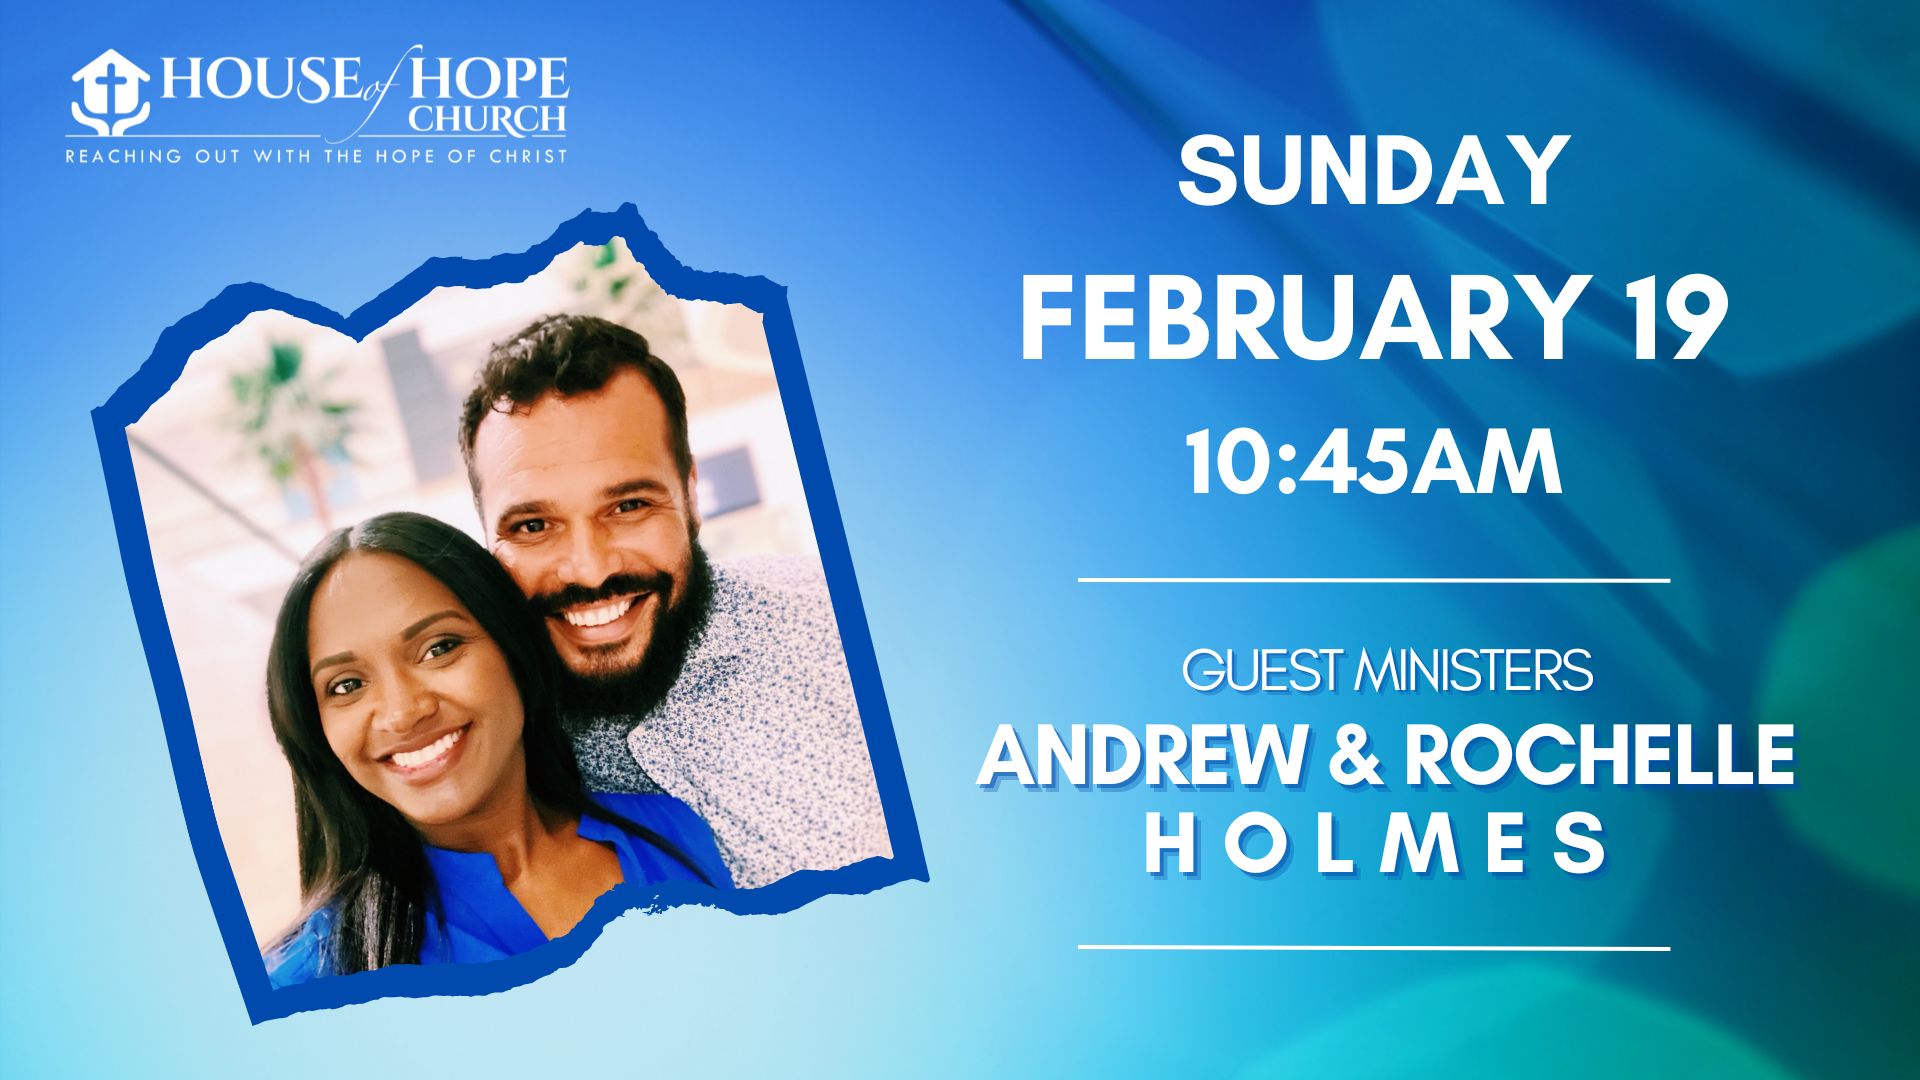 GUEST MINISTERS ANDREW & ROCHELLE HOLMES